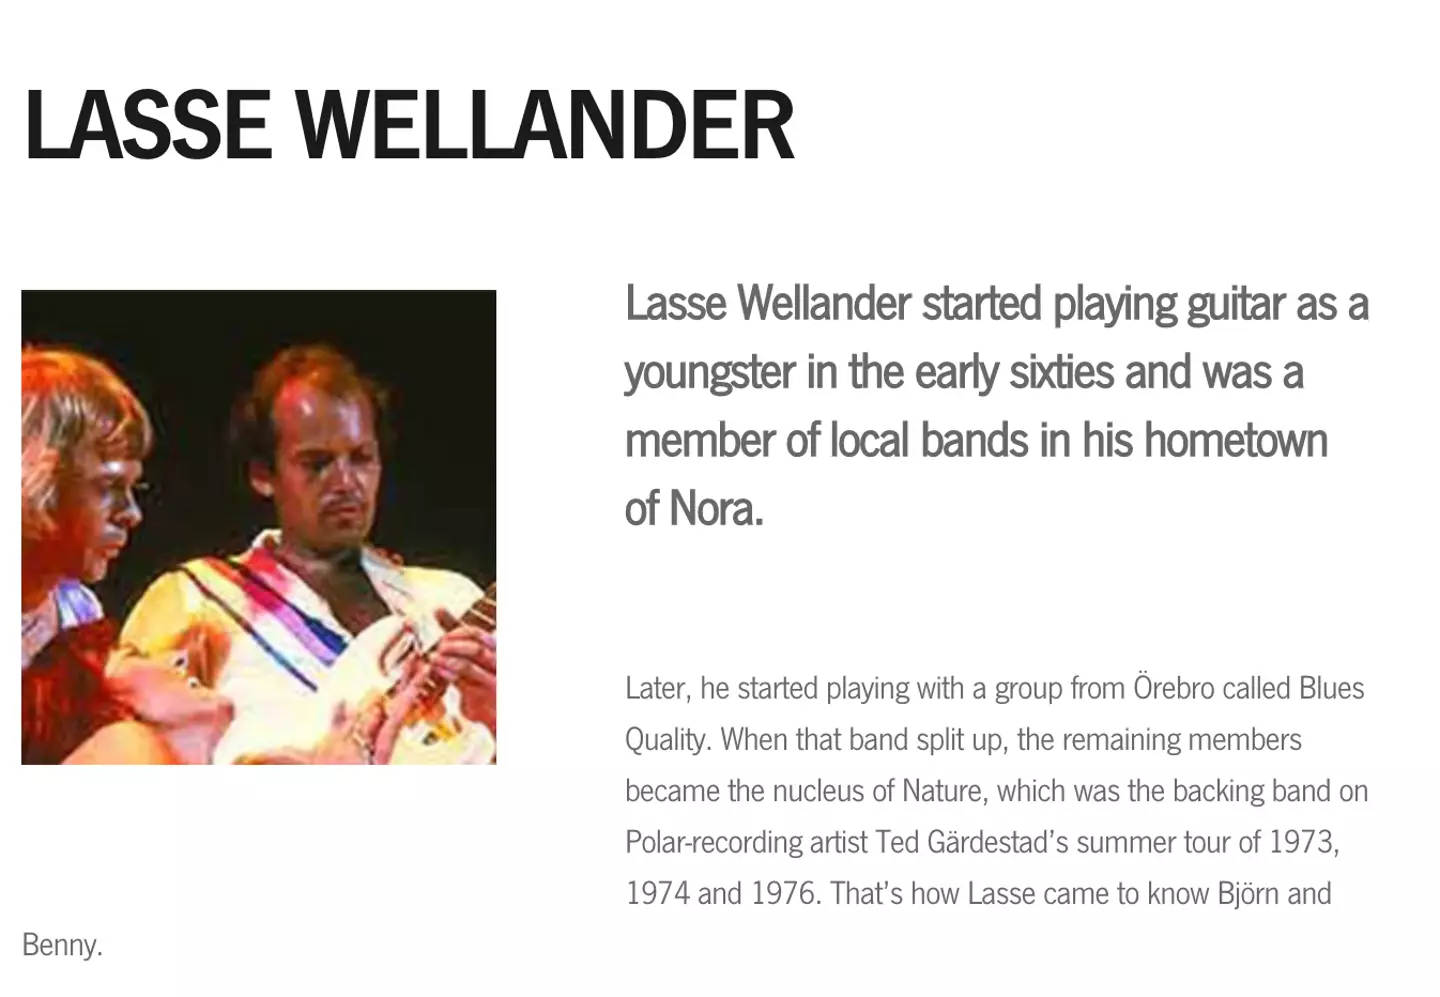 Alongside playing with ABBA, Wellander was also a solo musician, releasing several albums on his own.